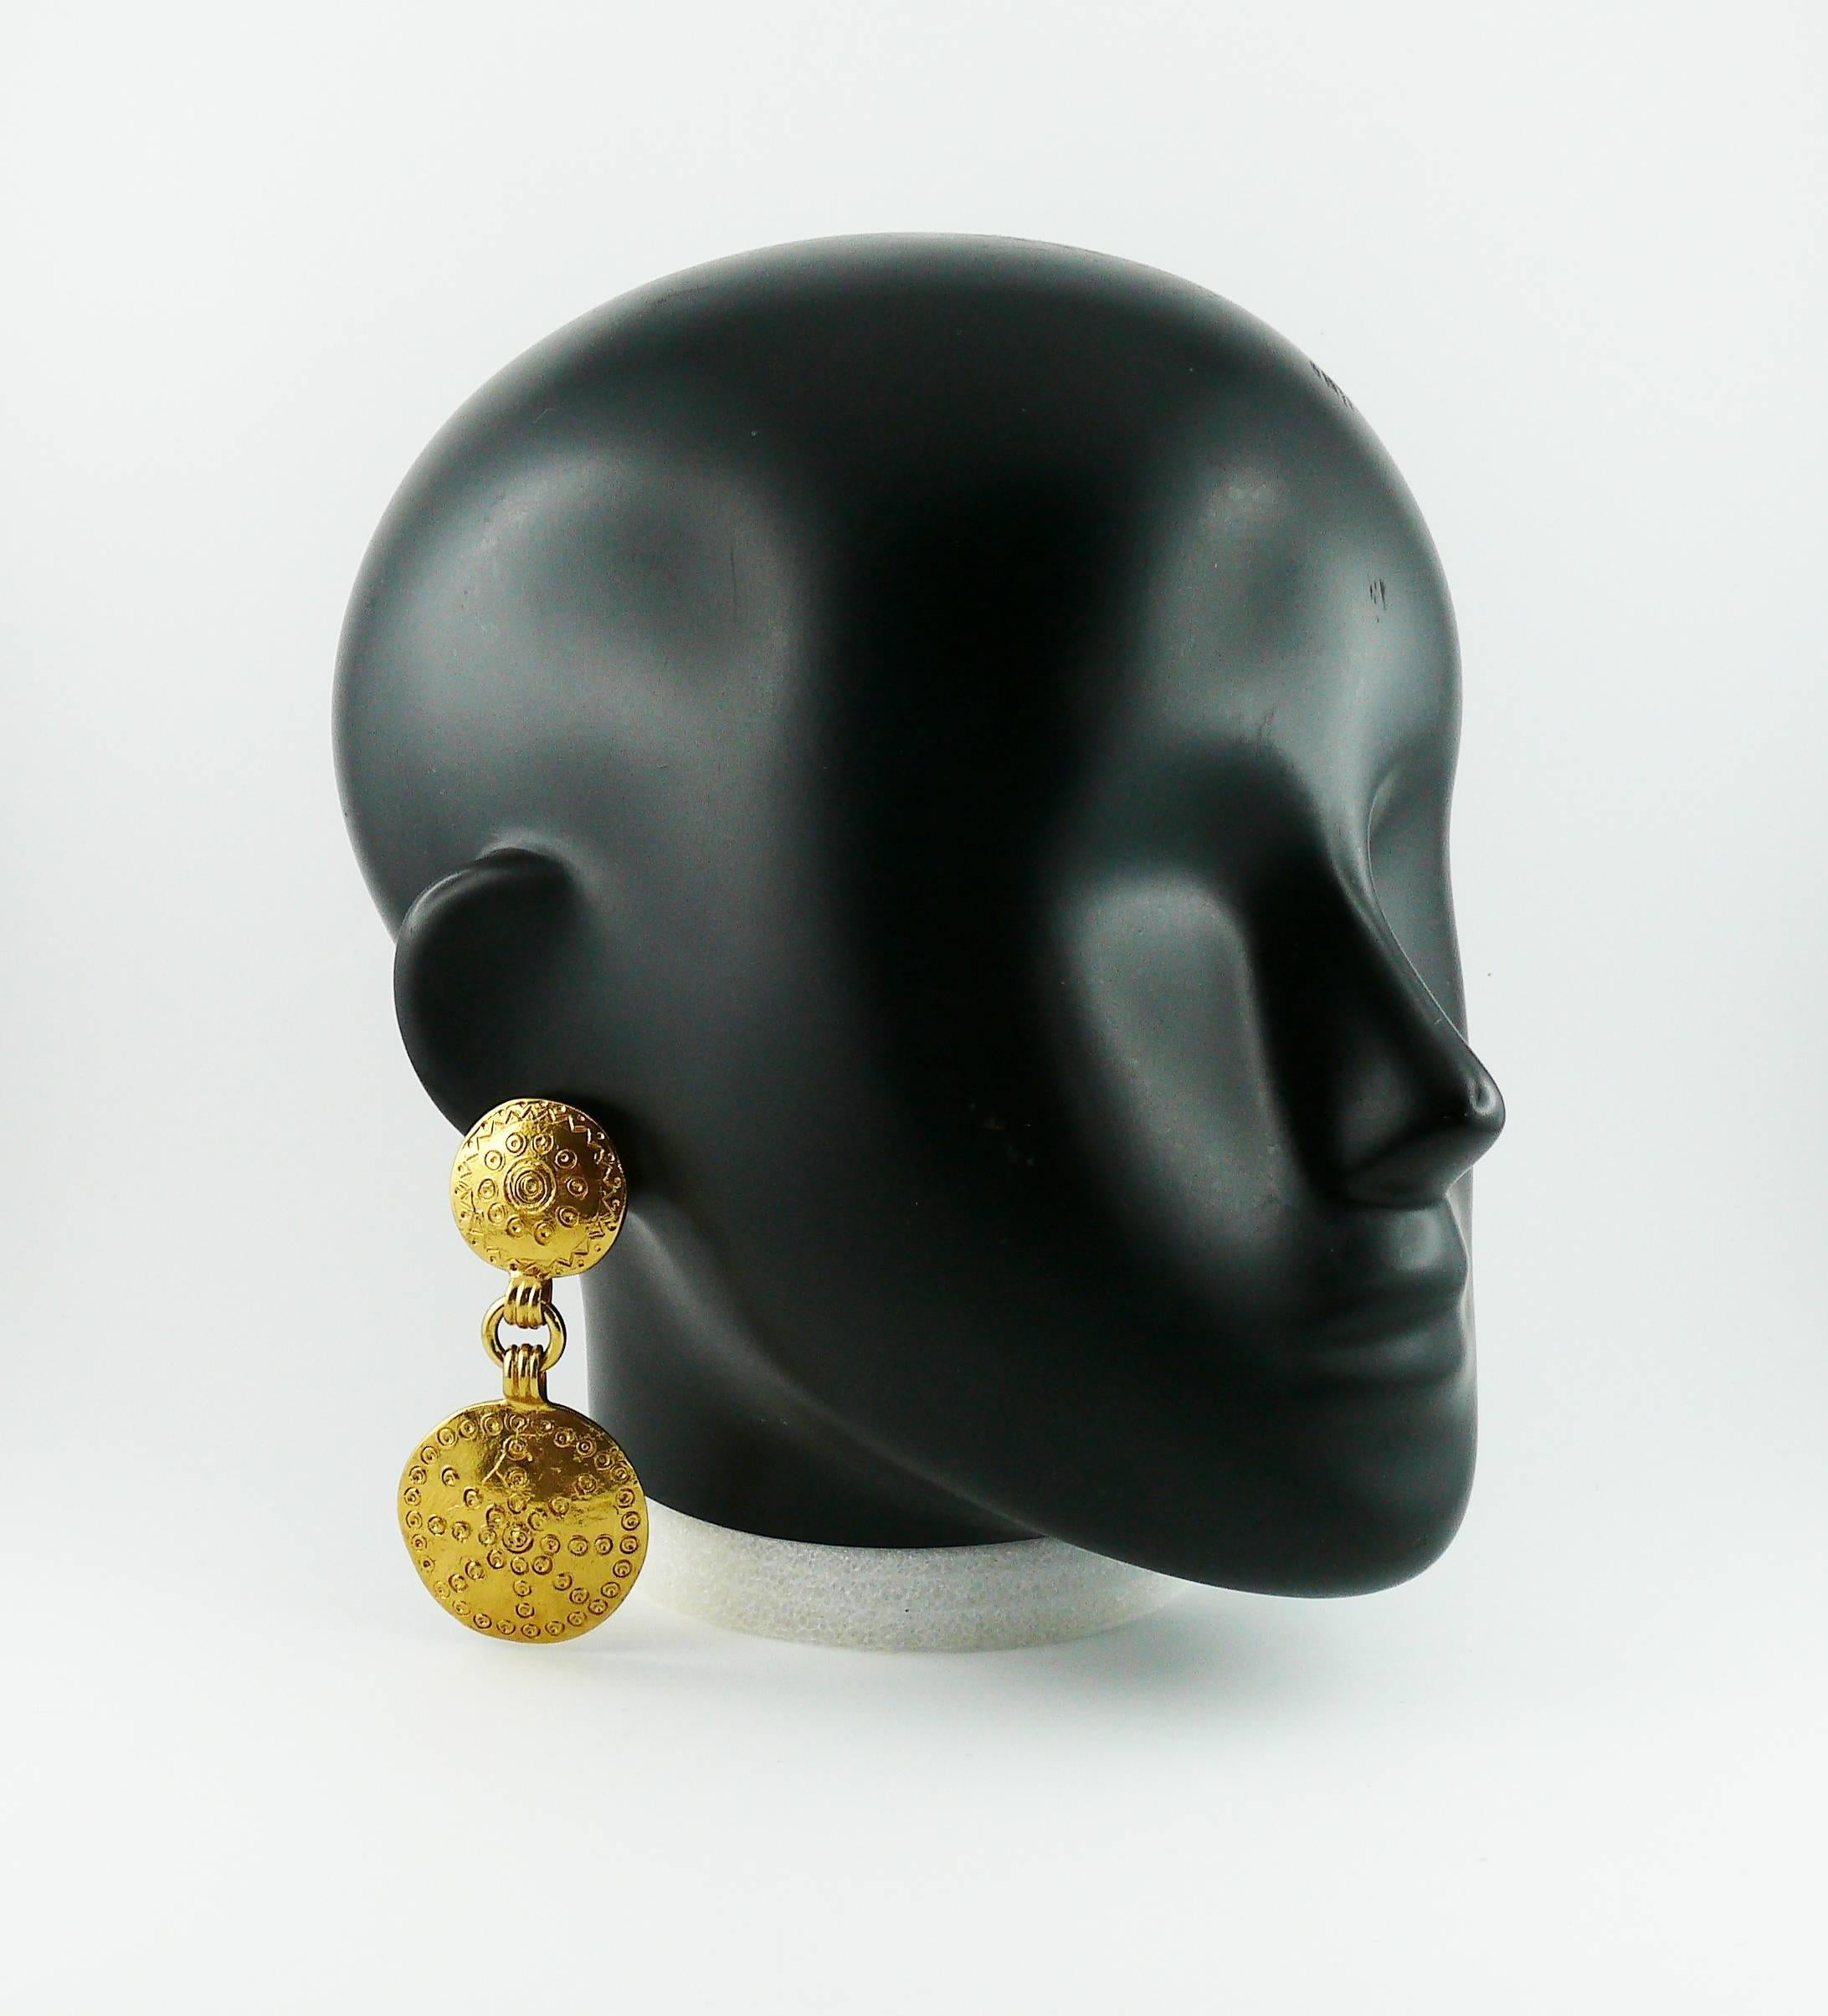 YVES SAINT LAURENT vintage gold toned ethnic inspired dangling earrings (clip-on) featuring two shields.

Marked YSL Made in France.

Indicative measurements : length approx. 8 cm (3.15 inches) / max. width approx. 3.6 cm (1.42 inches).

JEWELRY